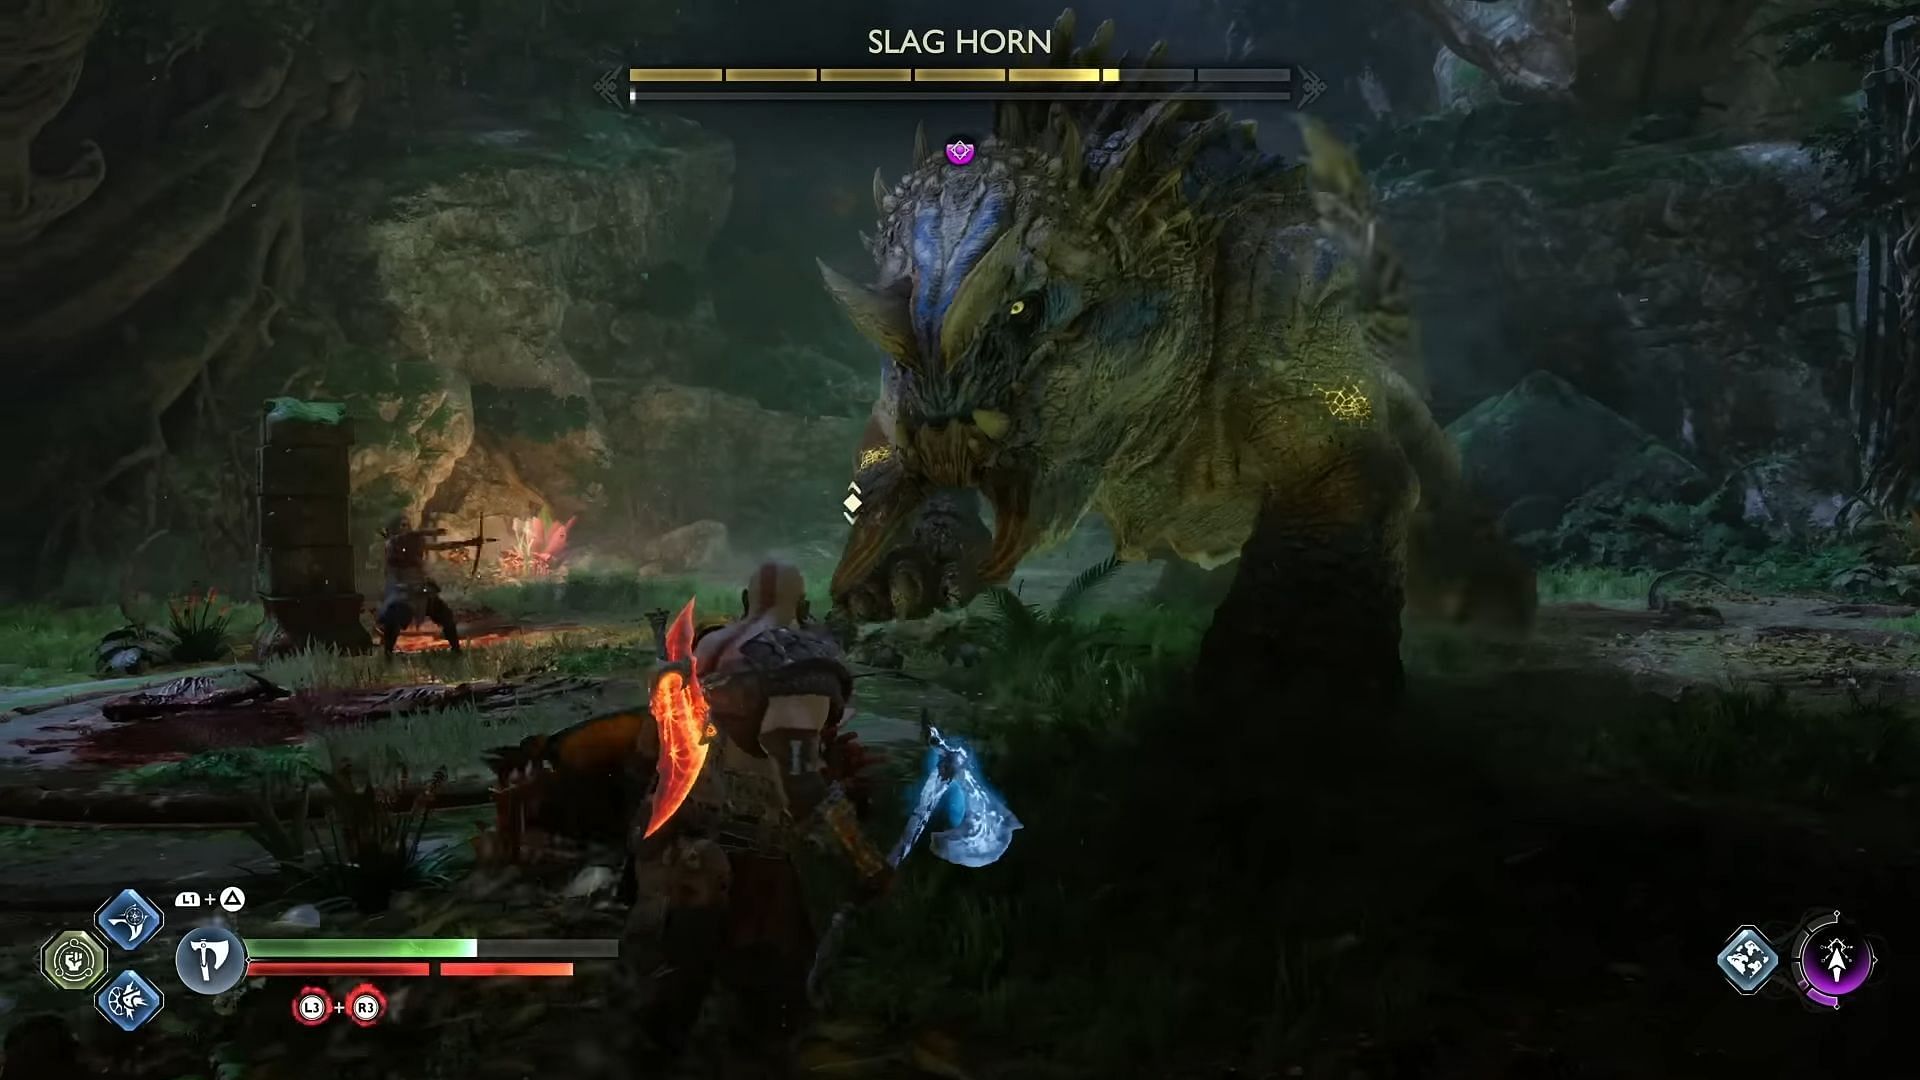 Kratos faces off against the Slag Horn (Image via YouTube/Release-Fire)